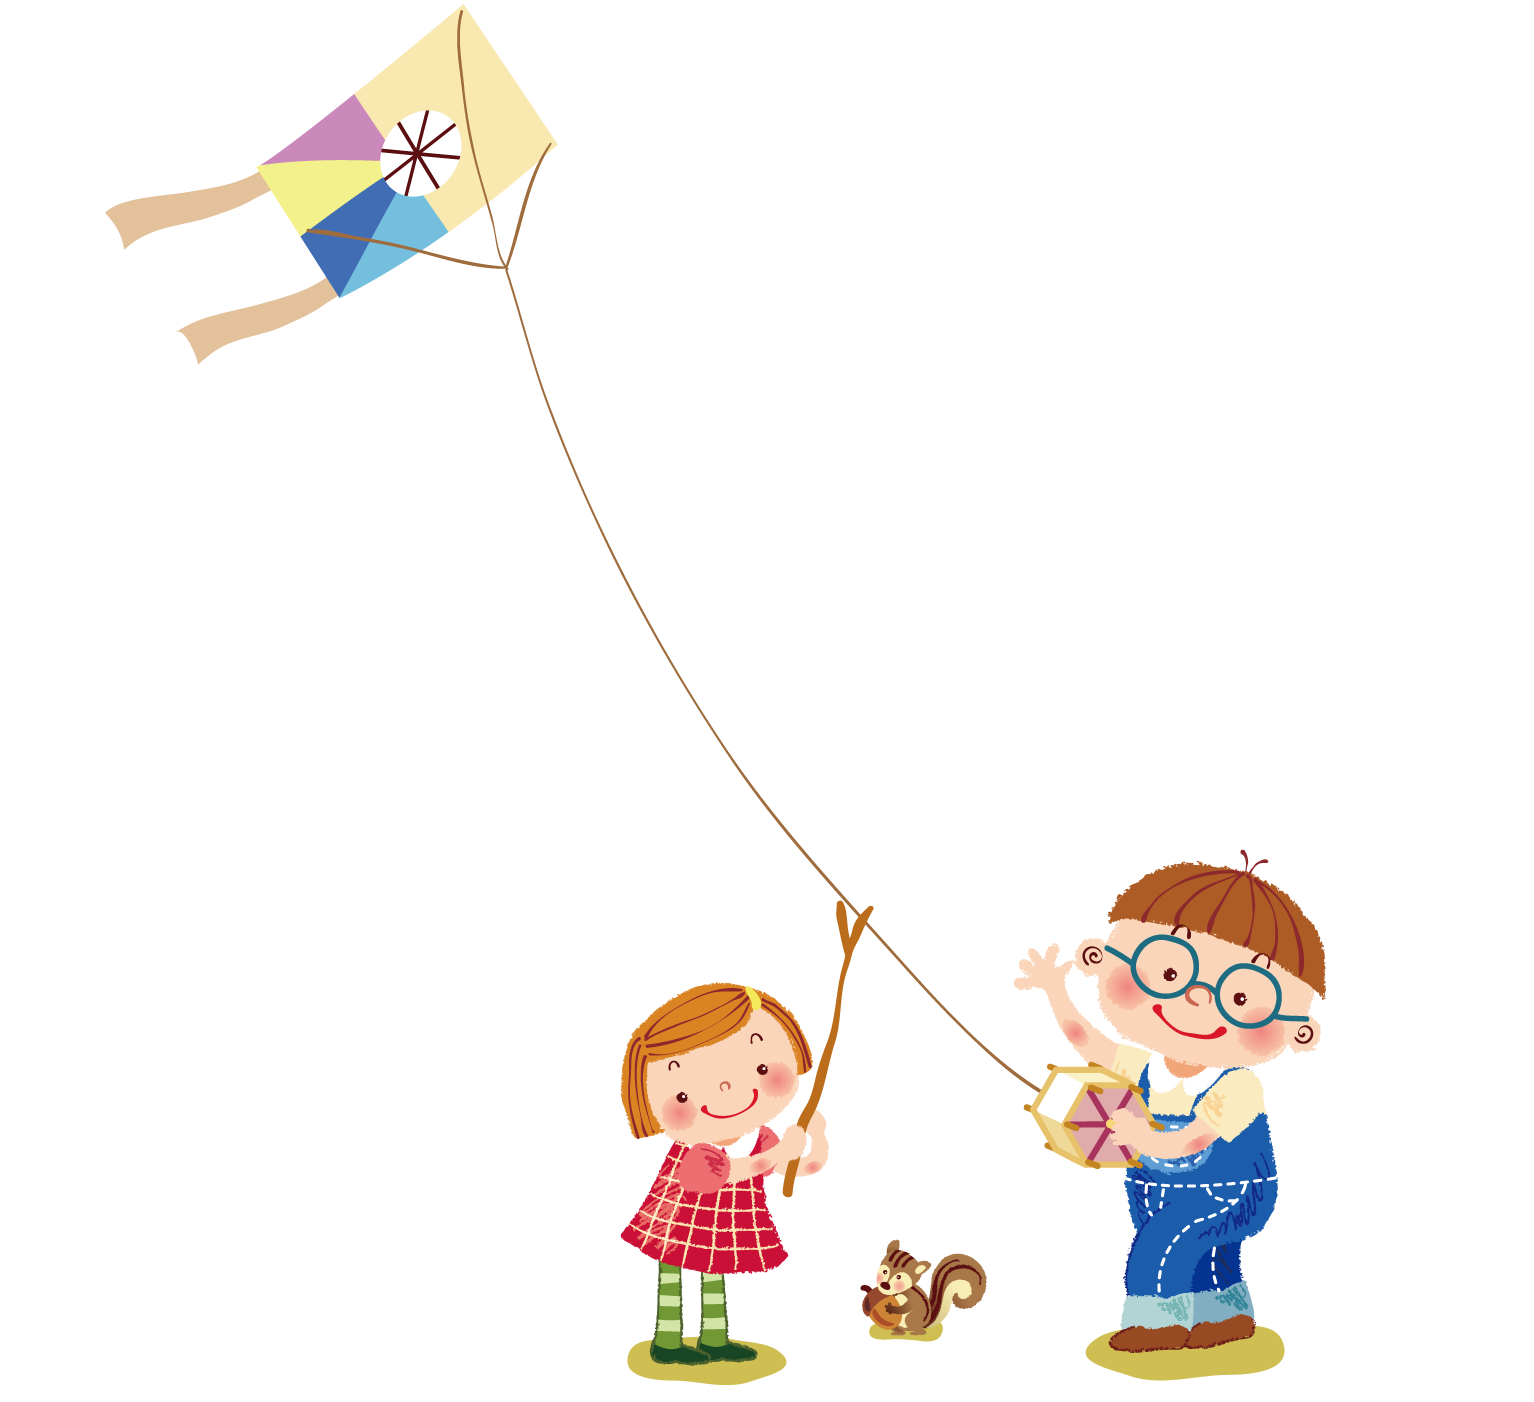 fly a kite clipart